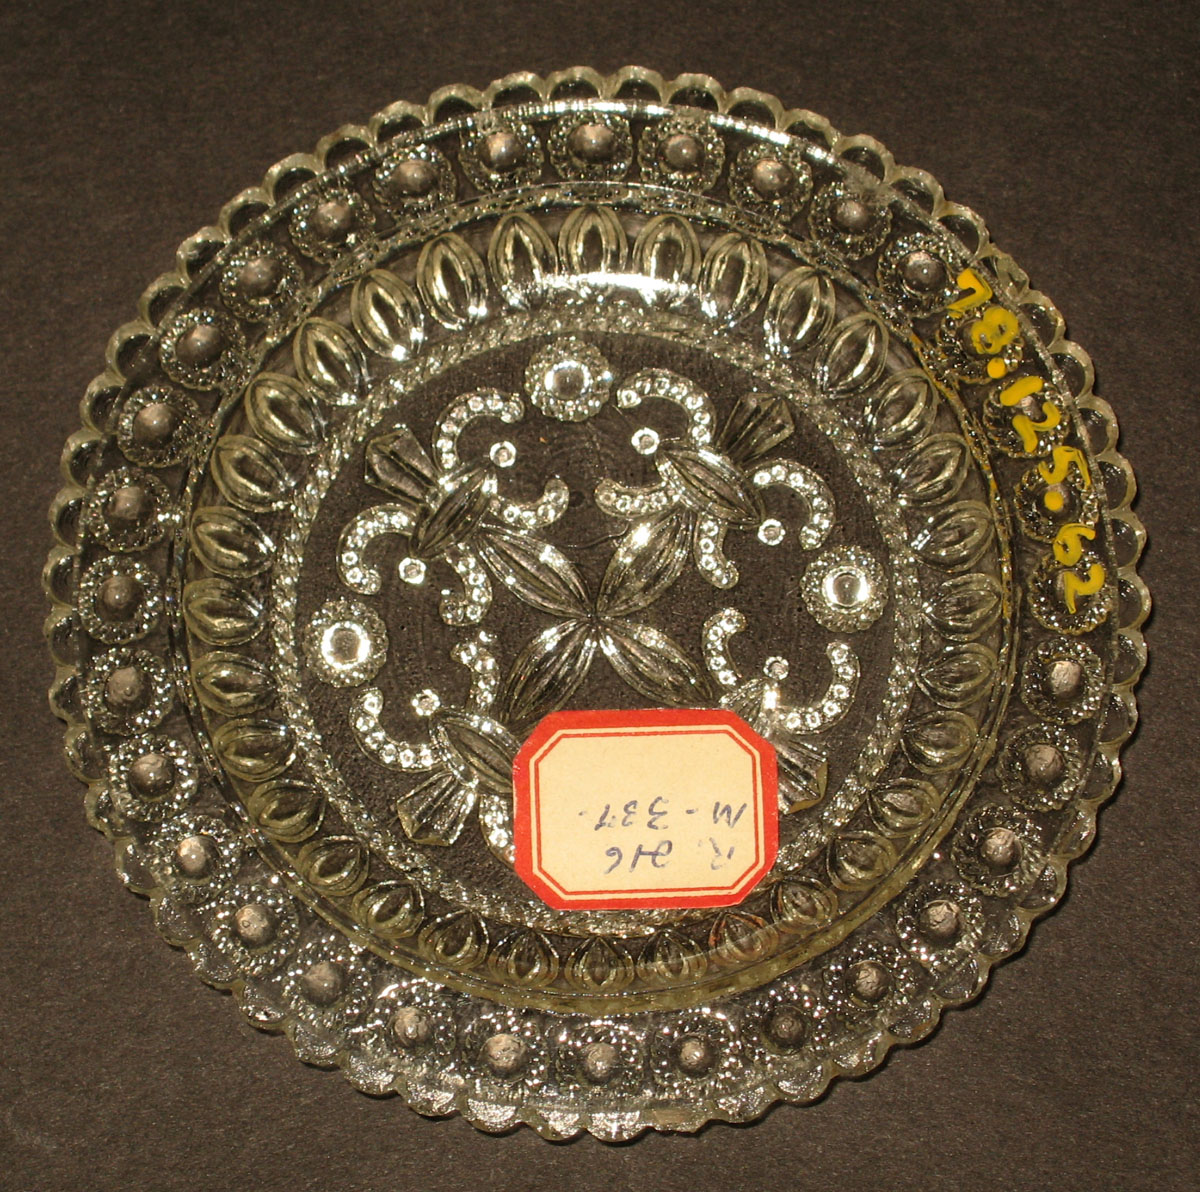 1978.0125.062 Glass cup plate